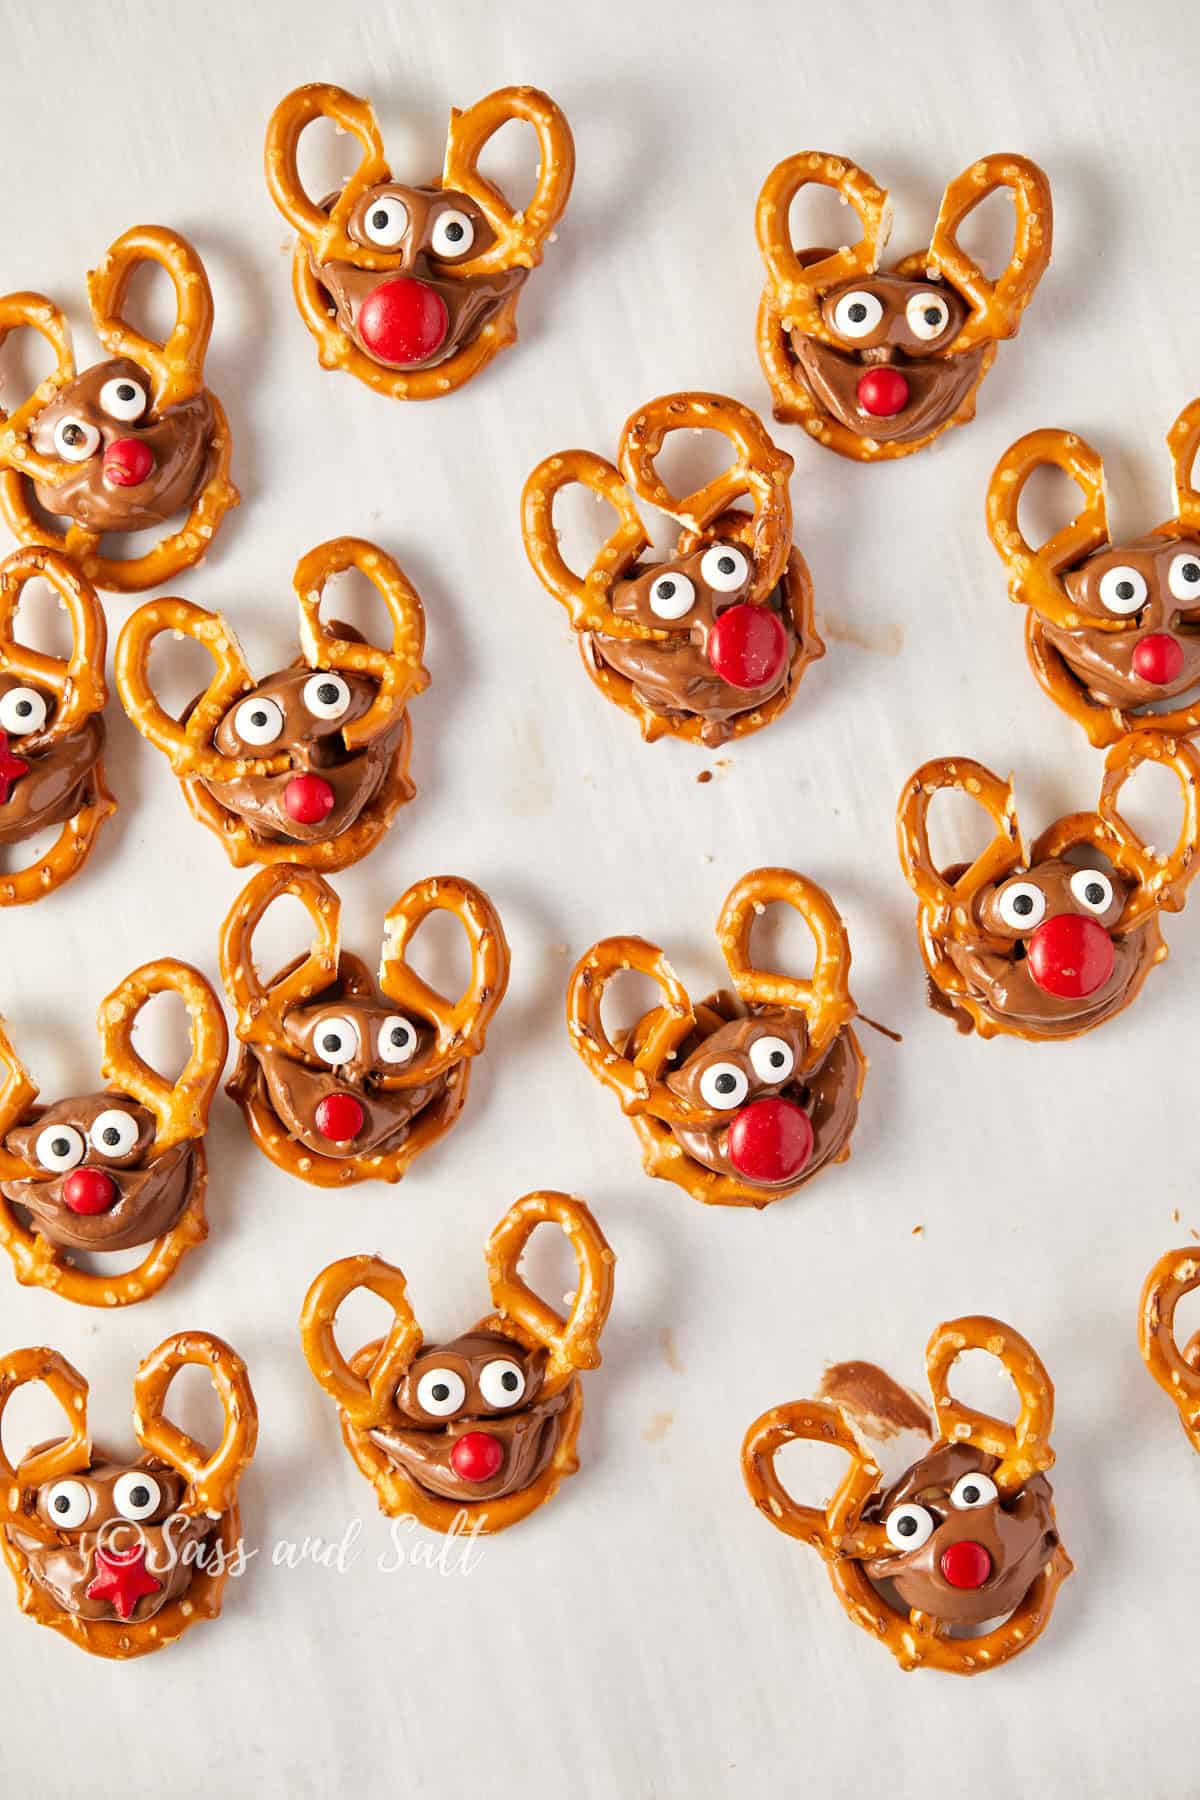 Overhead view of homemade Rolo pretzel reindeer treats with antlers, eyes, and red noses.